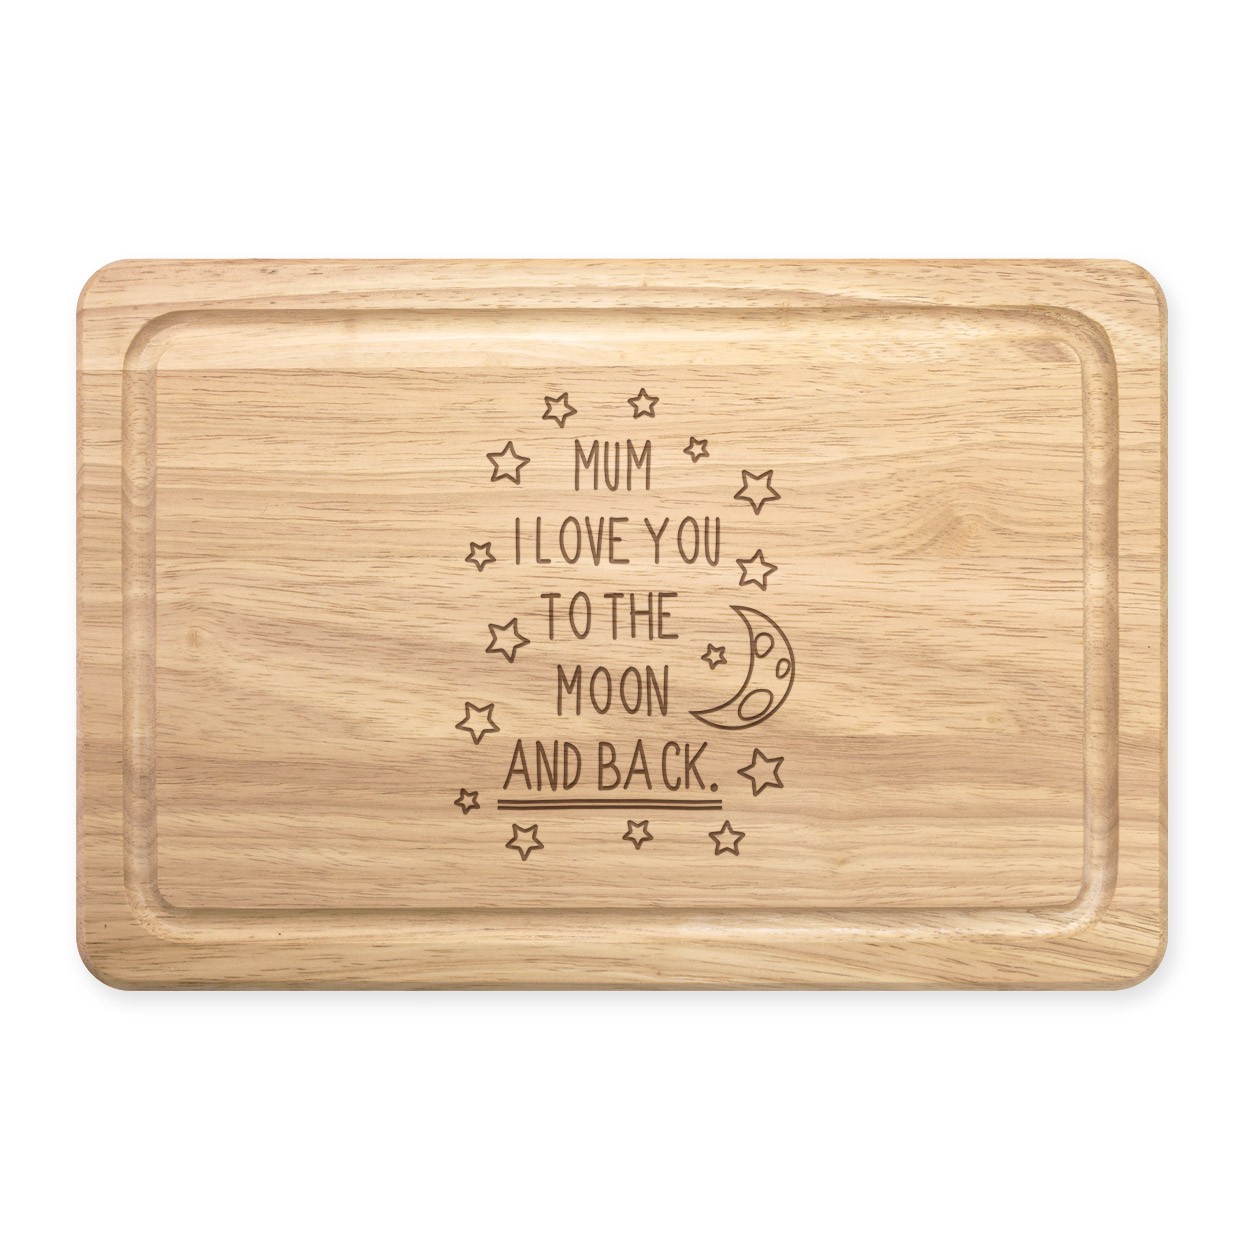 Mum I Love You To The Moon And Back Rectangular Wooden Chopping Board